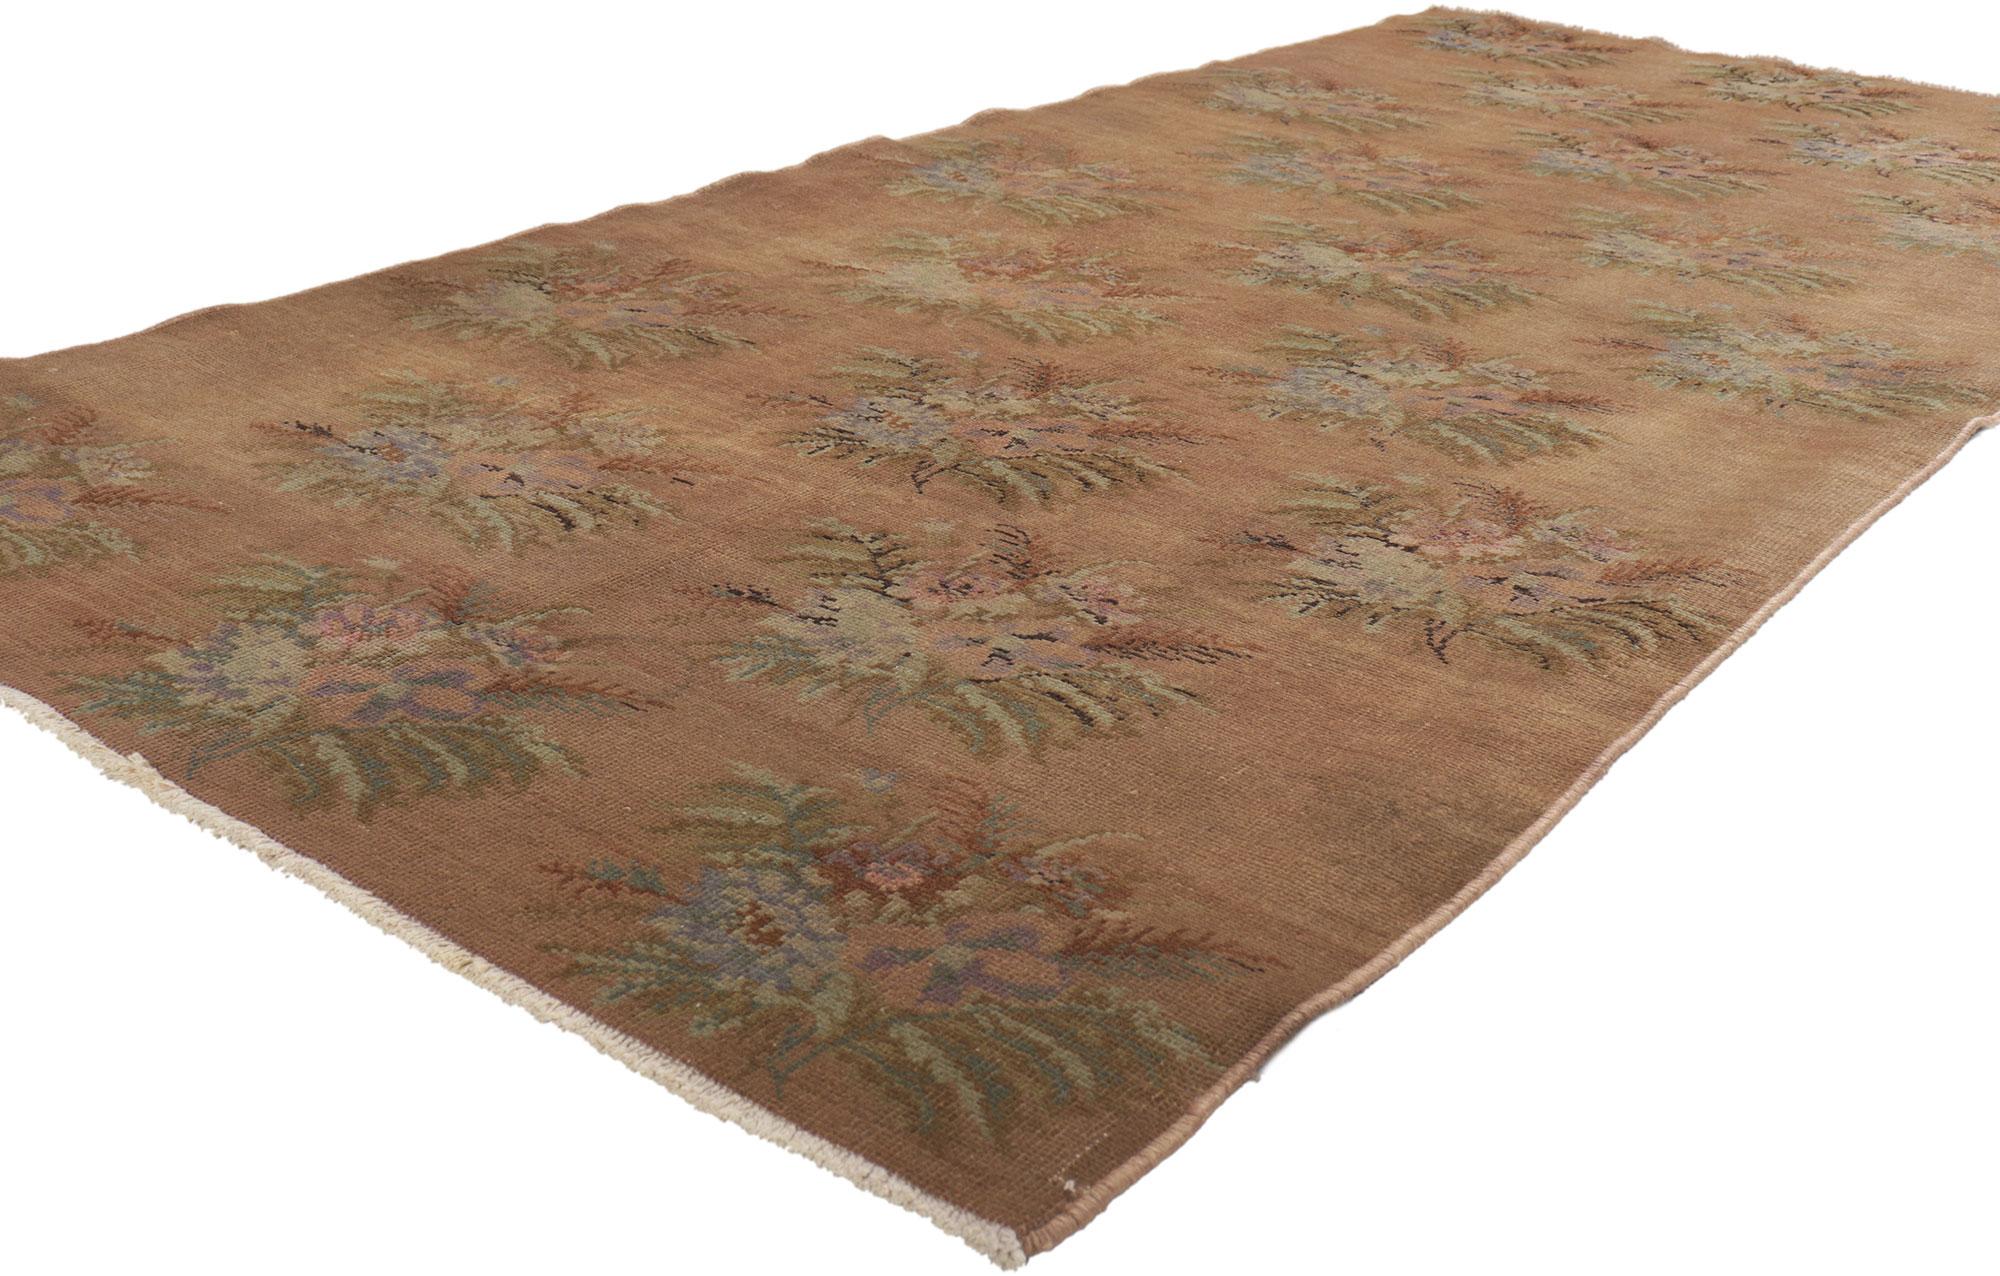 50907 Vintage Turkish Sivas Rug Runner, 04'00 x 08'07. In a delightful union of Artisan and Cottagecore styles, this hand-knotted wool vintage Turkish Sivas rug runner whispers tales of timeless beauty. The careful blending of handcrafted natural